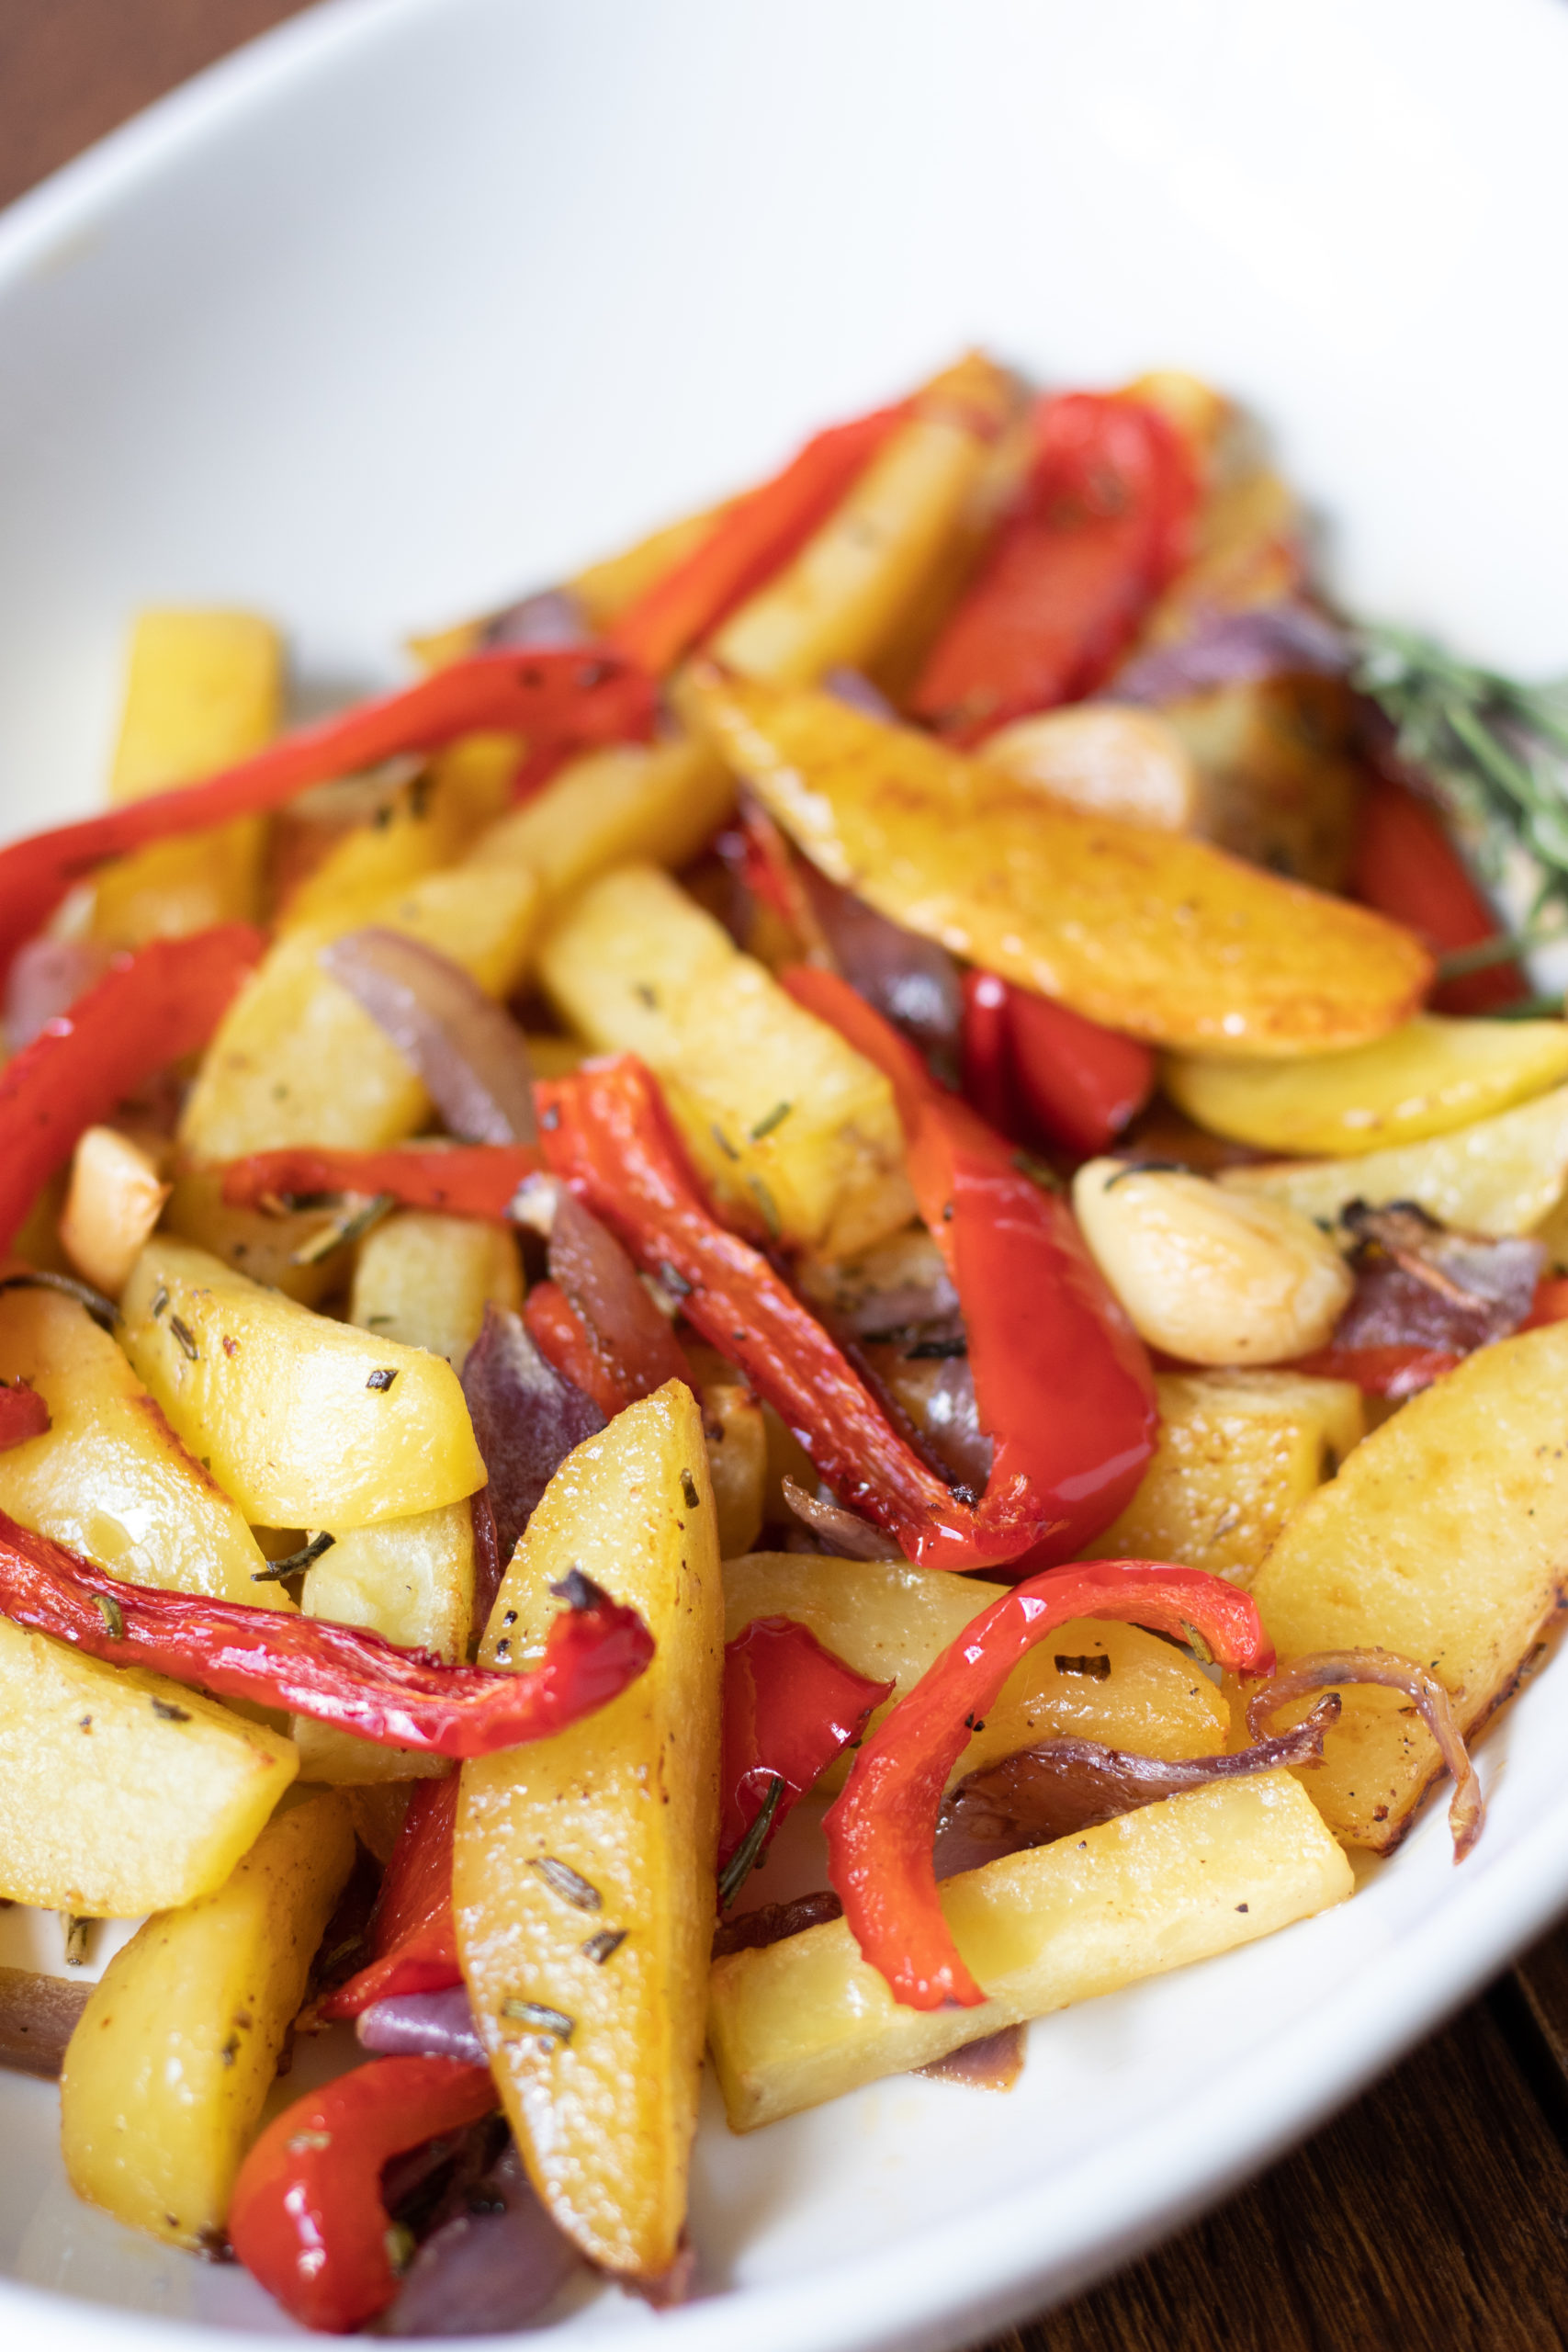 Roasted Potatoes with Red Bell Peppers, Onions, and Rosemary - The